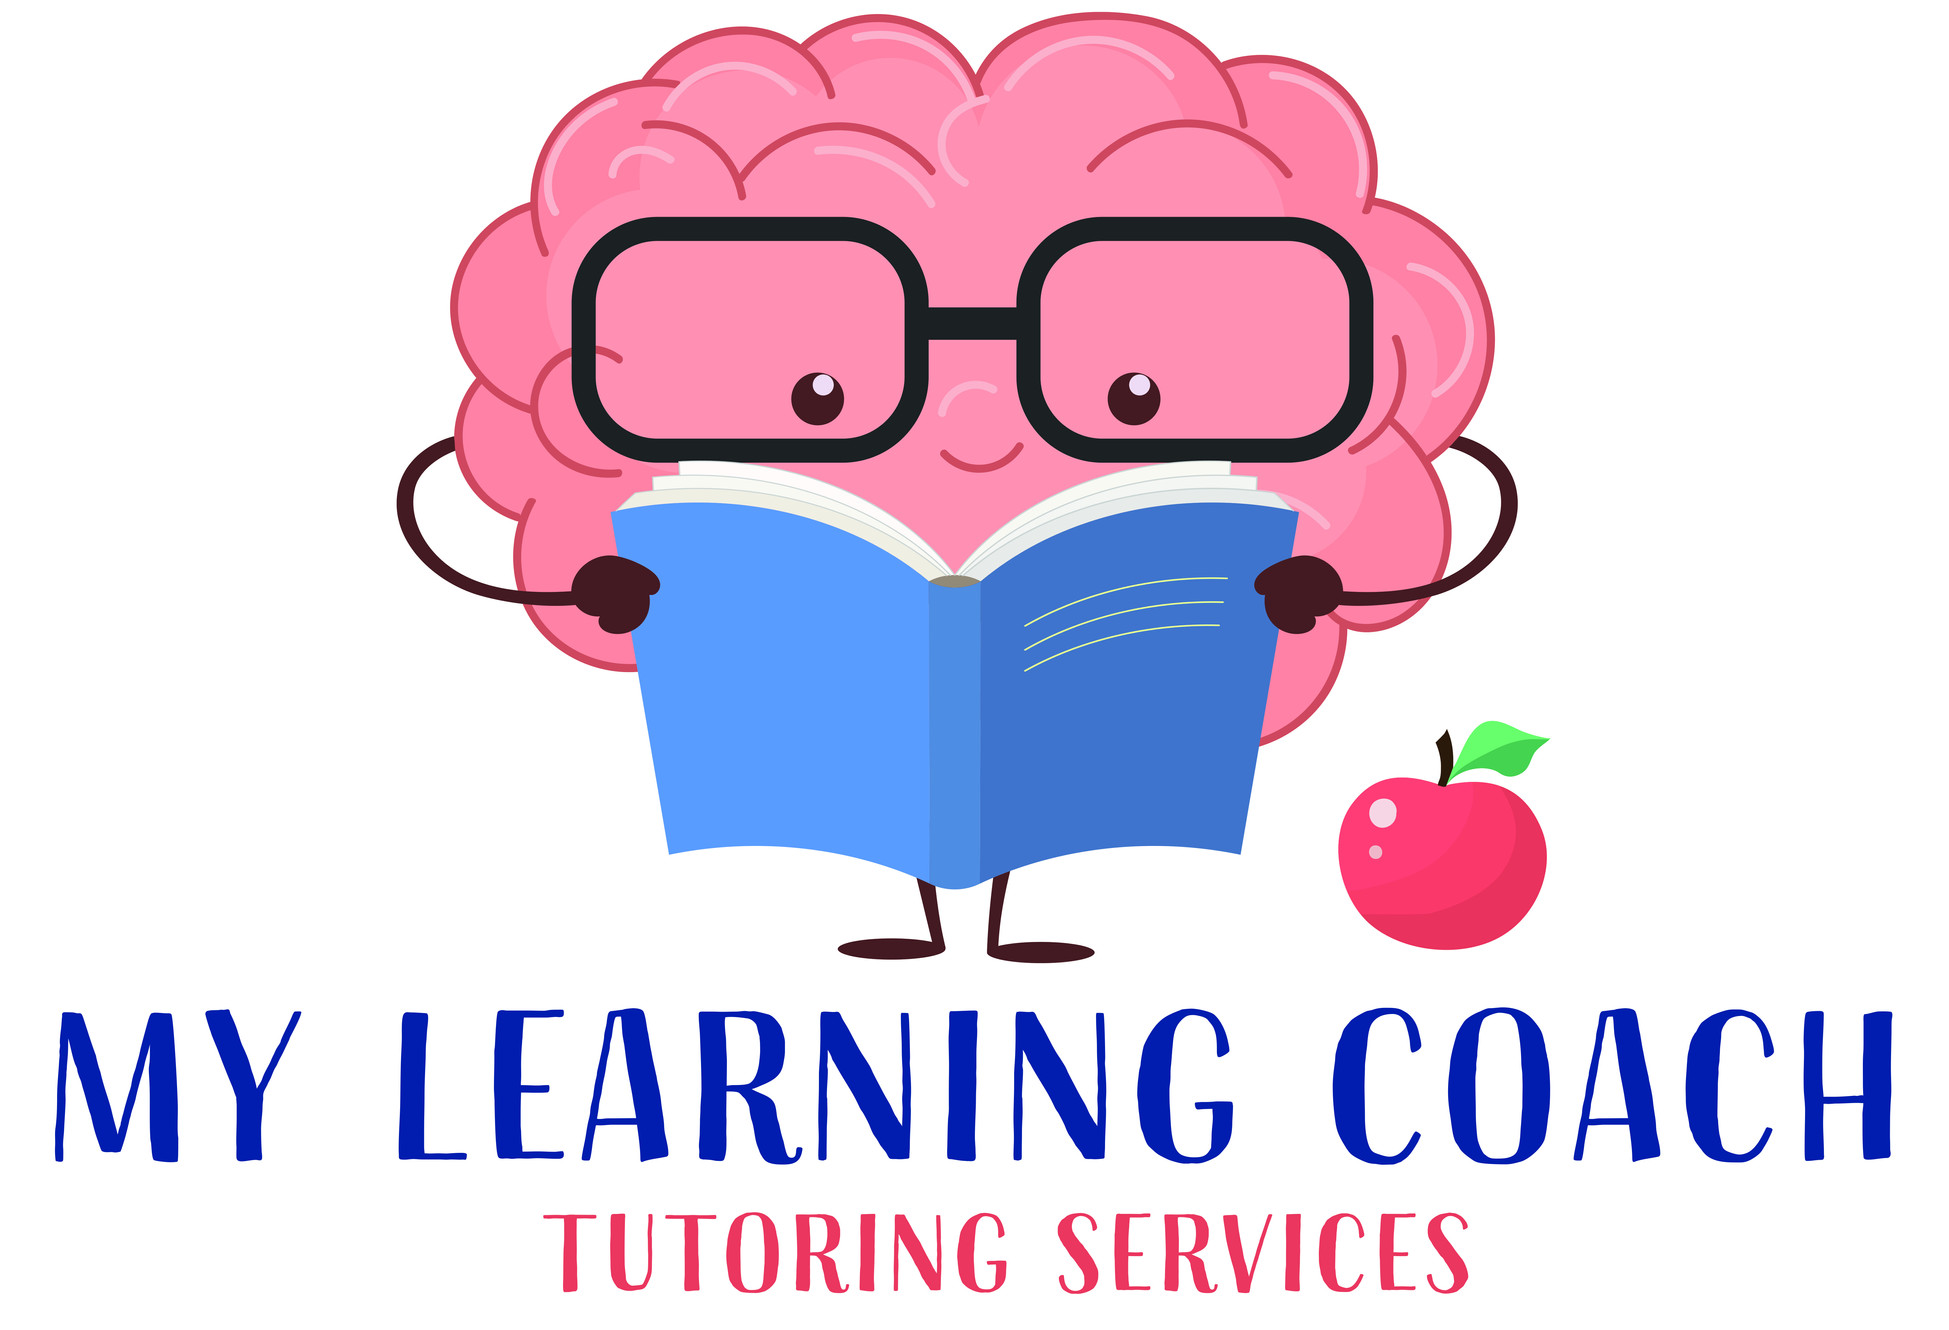 My Learning Coach Tutoring Services